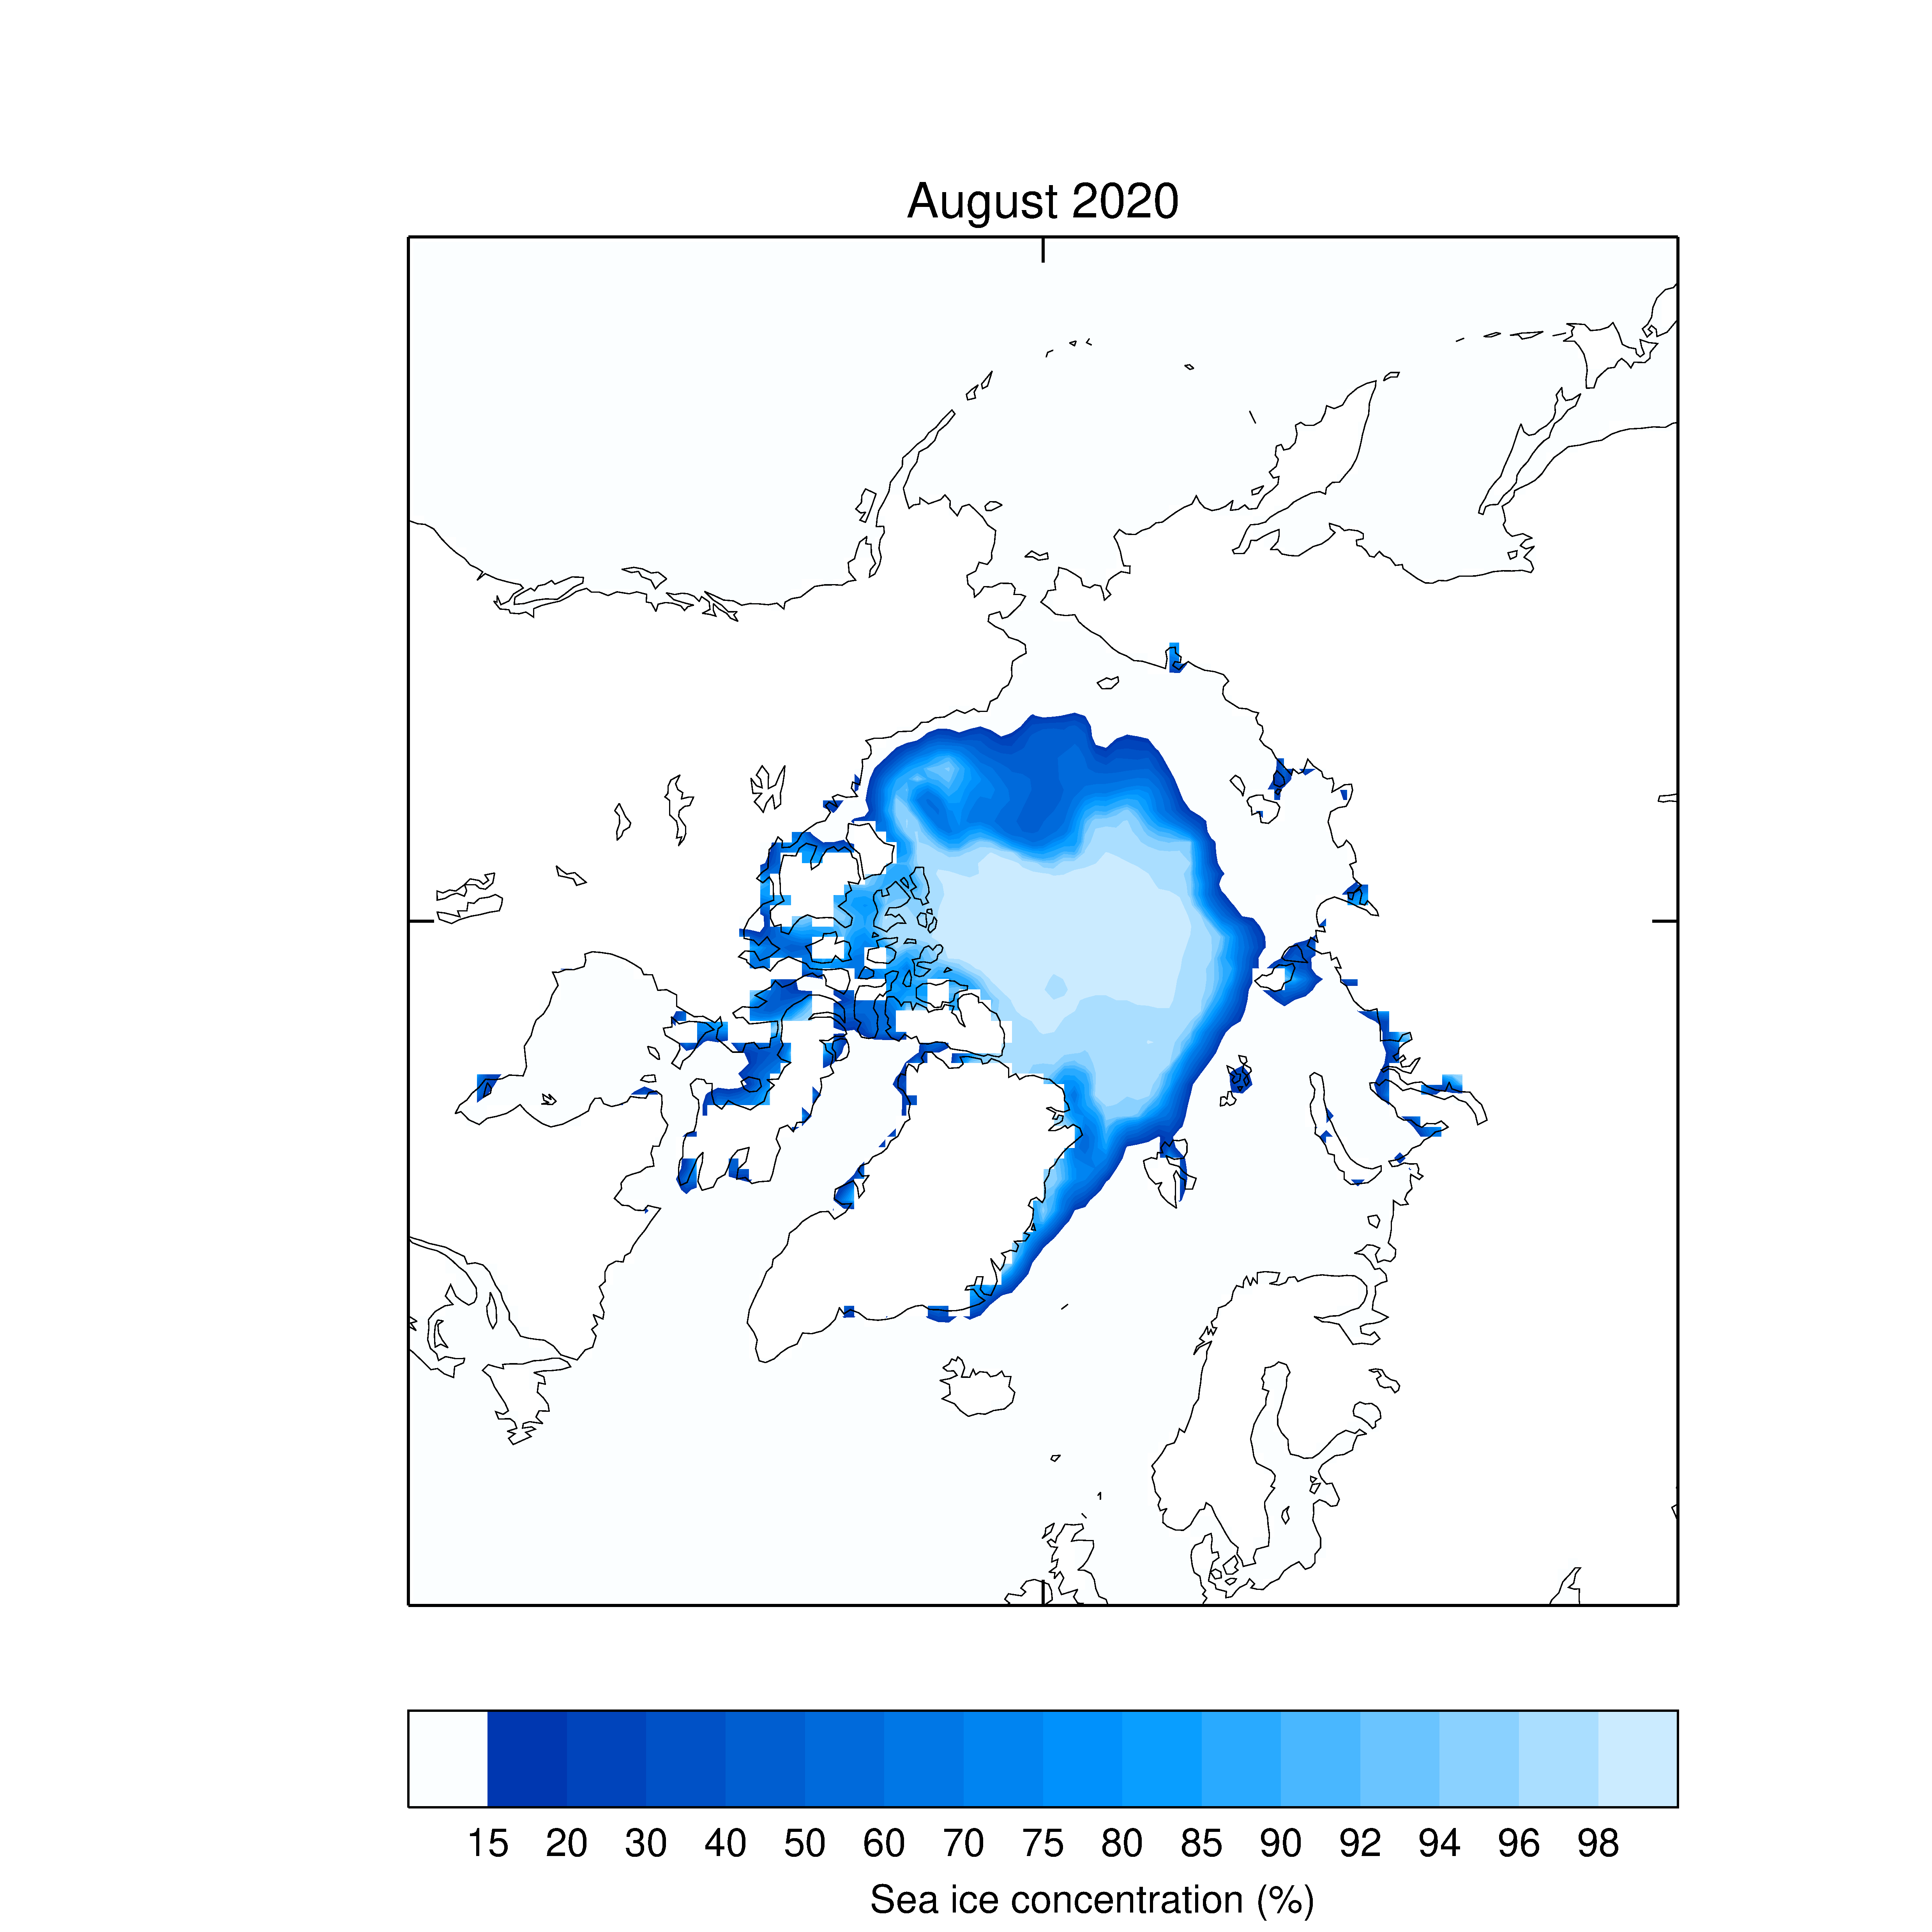 Map of sea ice concentration for the latest available month